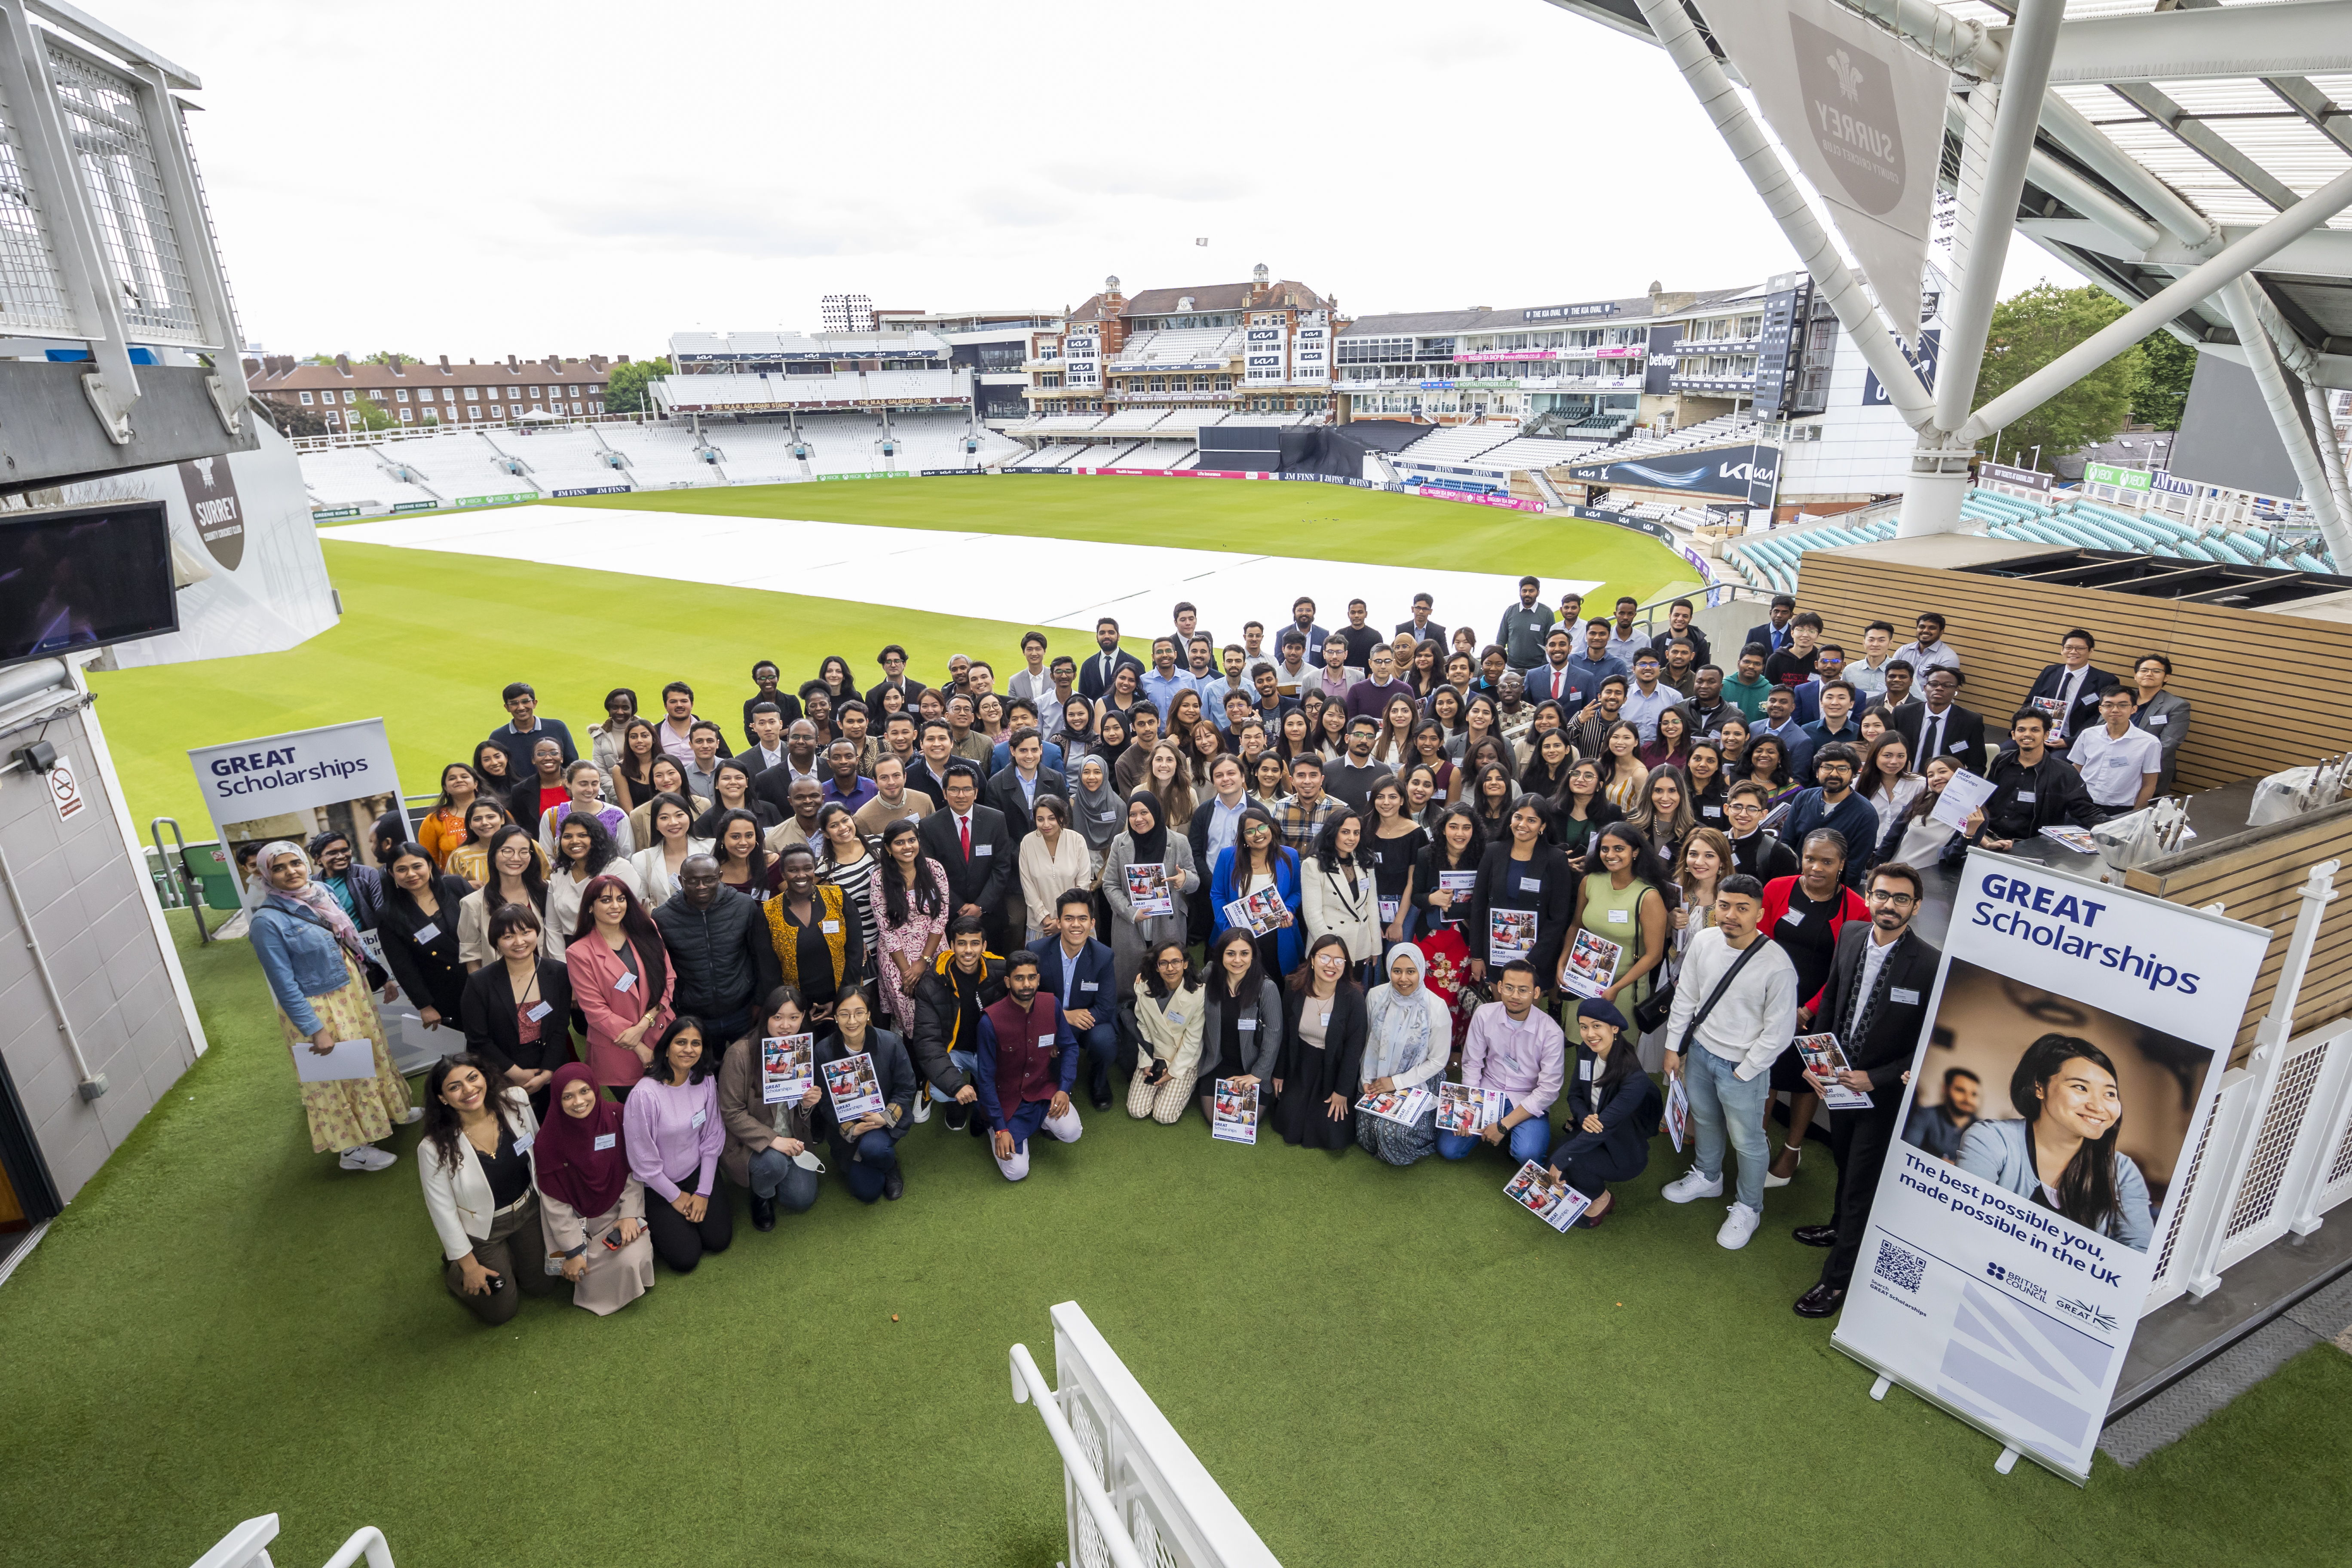 Group photo of all the GREAT scholars who attended the meet-up event in London in May 2022